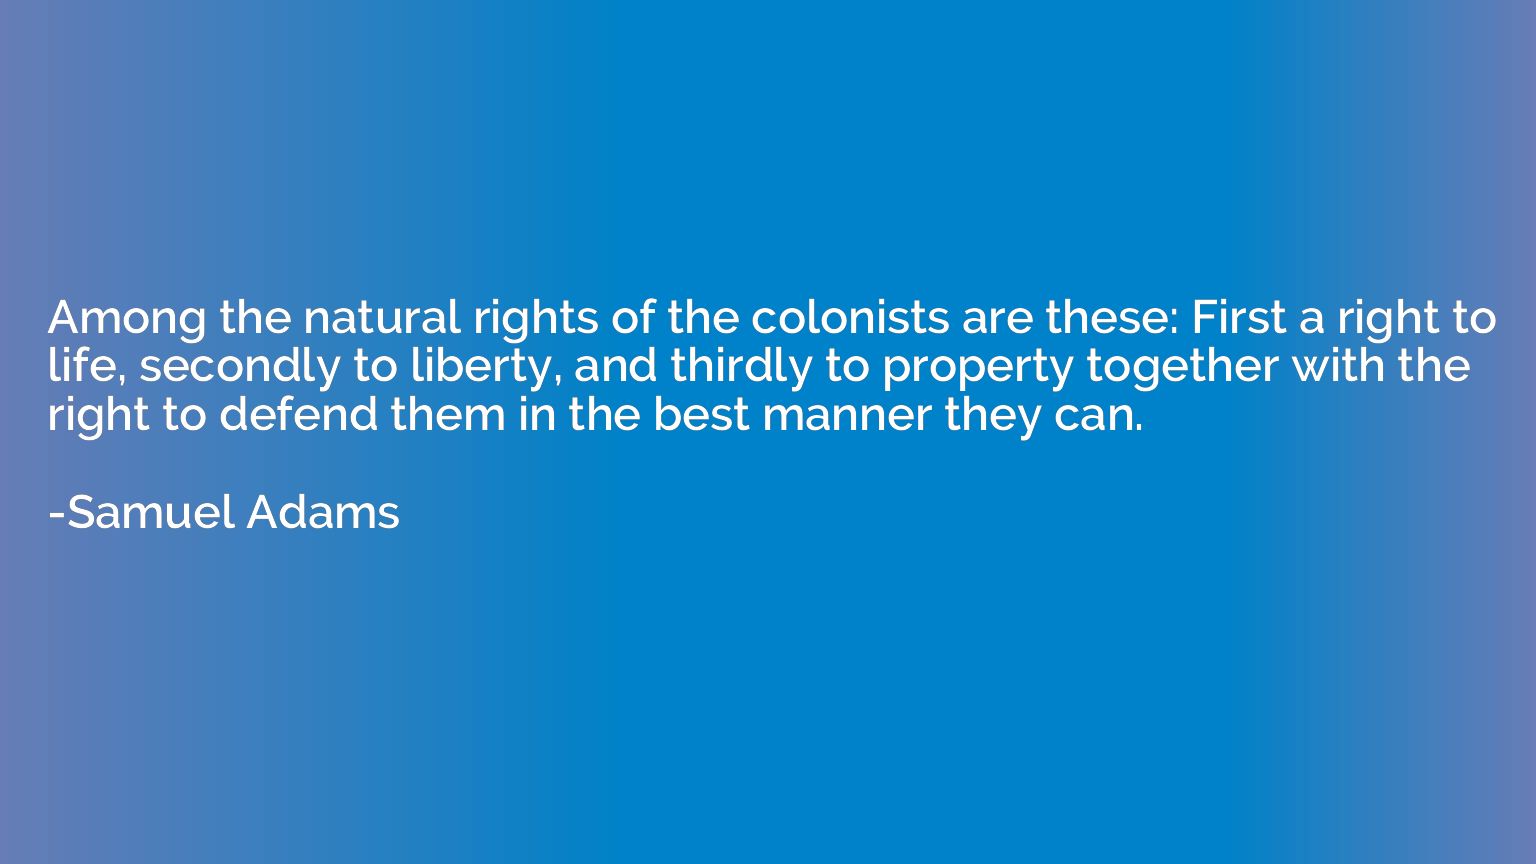 Among the natural rights of the colonists are these: First a